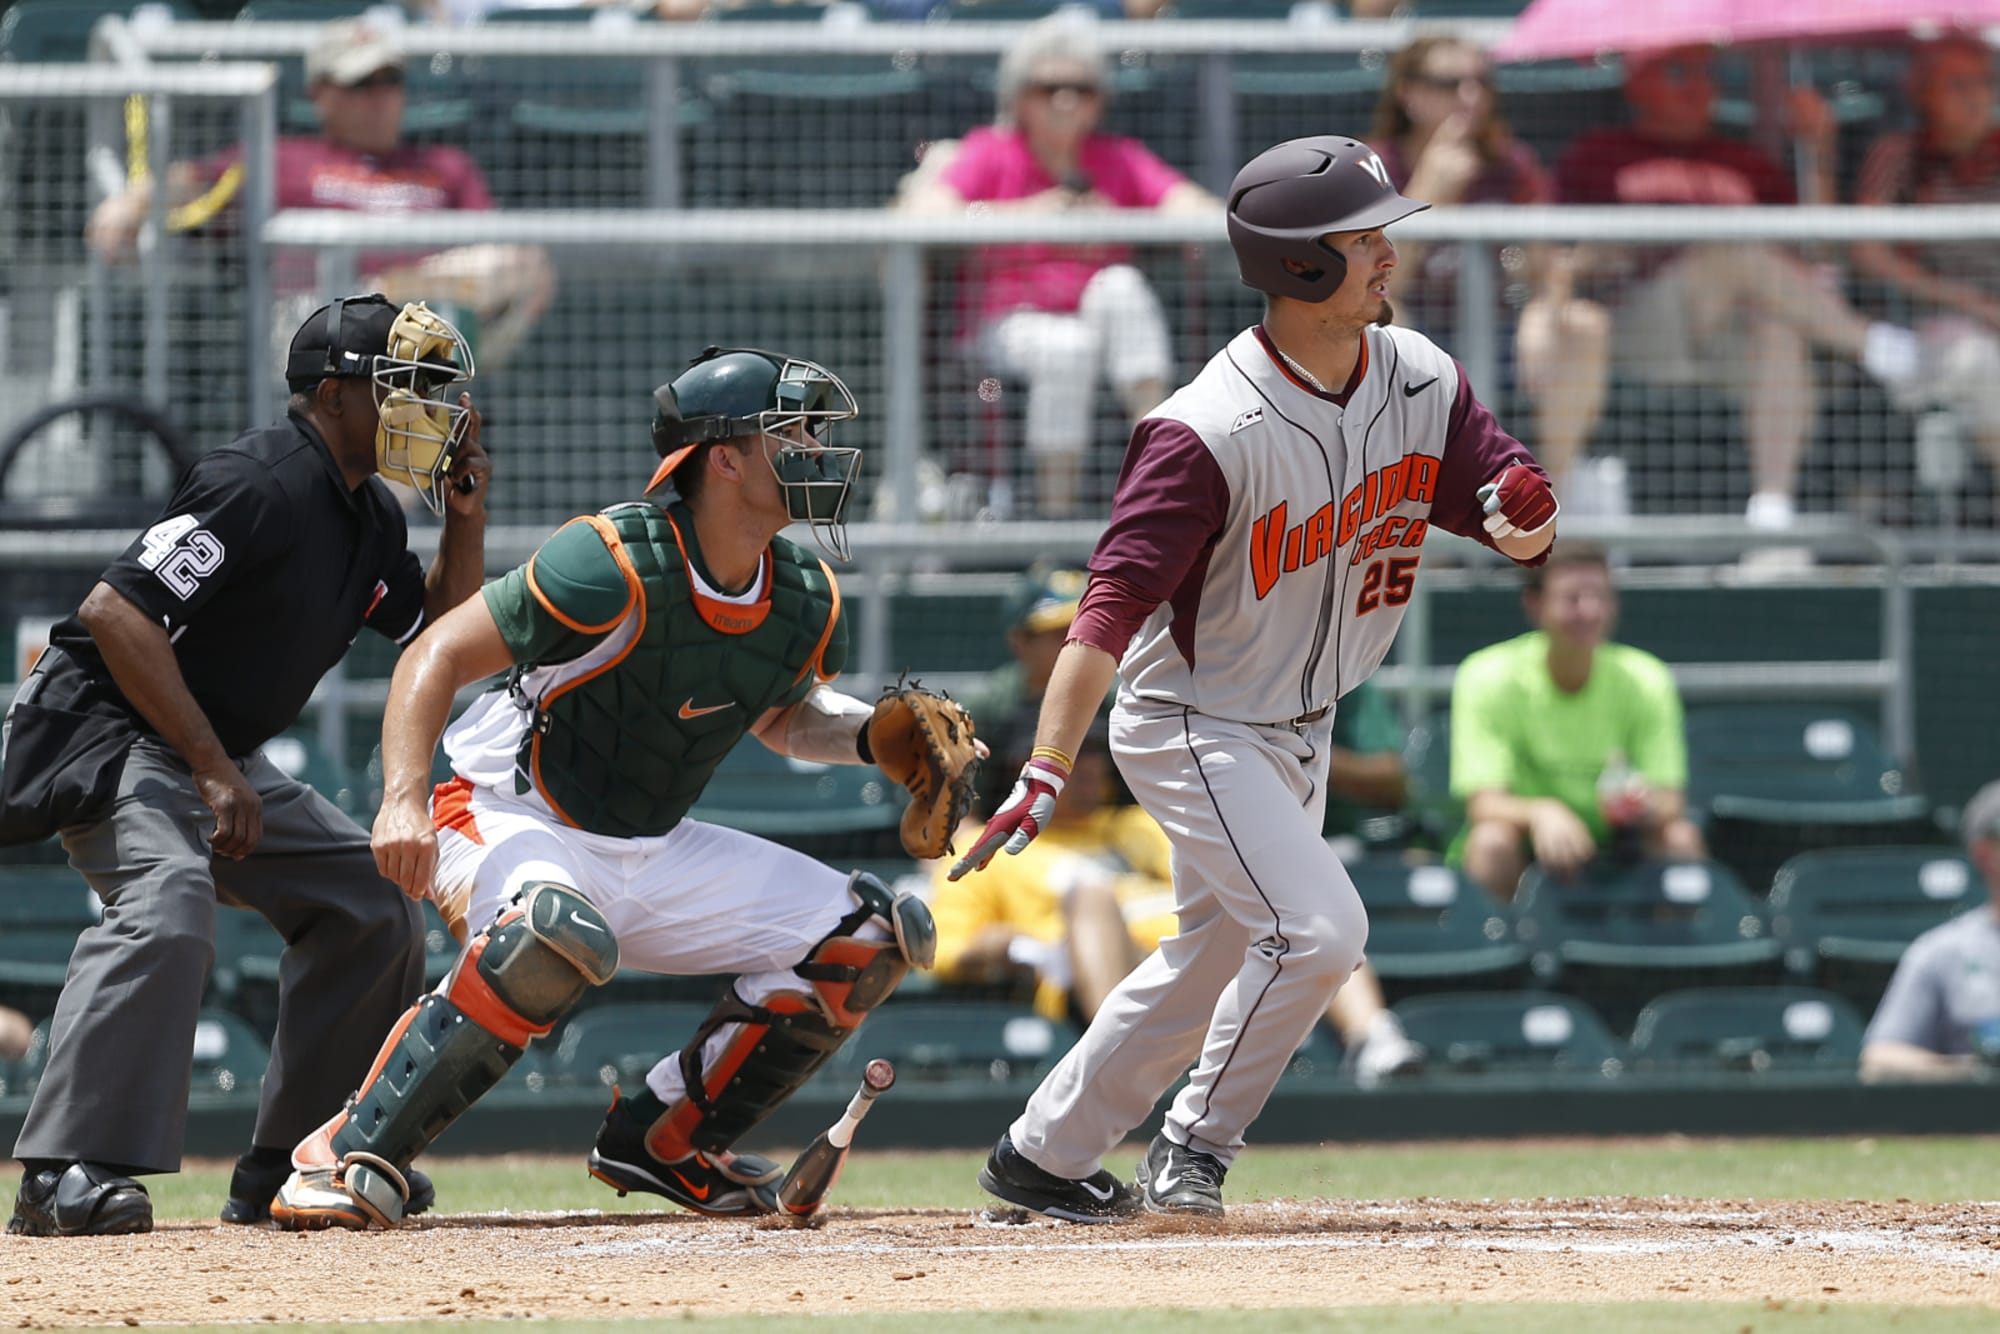 Miami baseball will fall in rankings losing series to VaTech